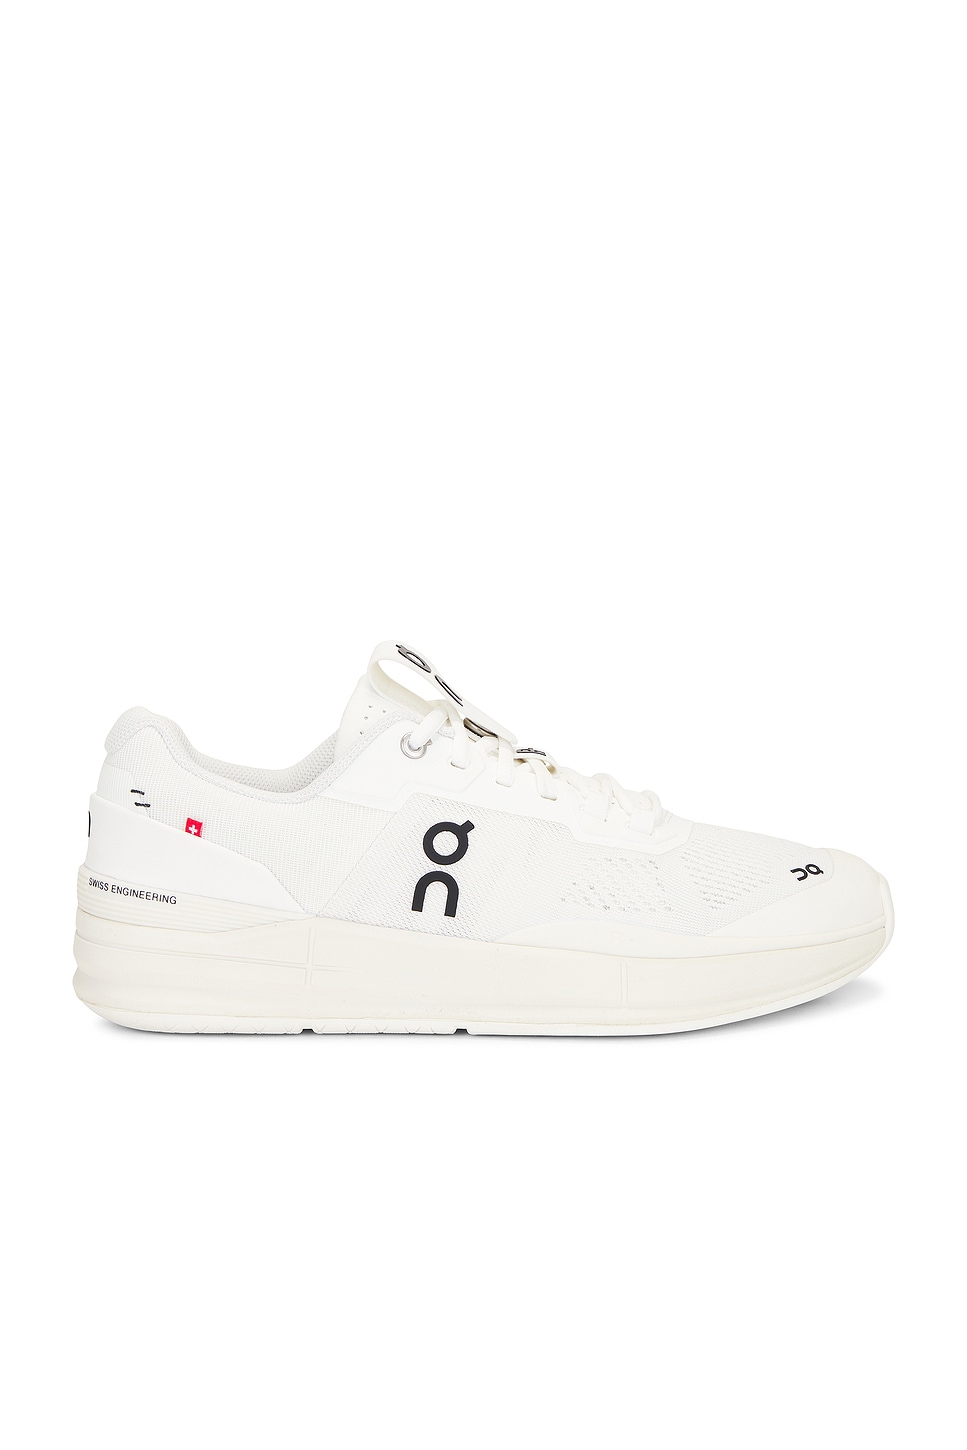 Image 1 of On The Roger Pro Sneaker in Undyed White & Black